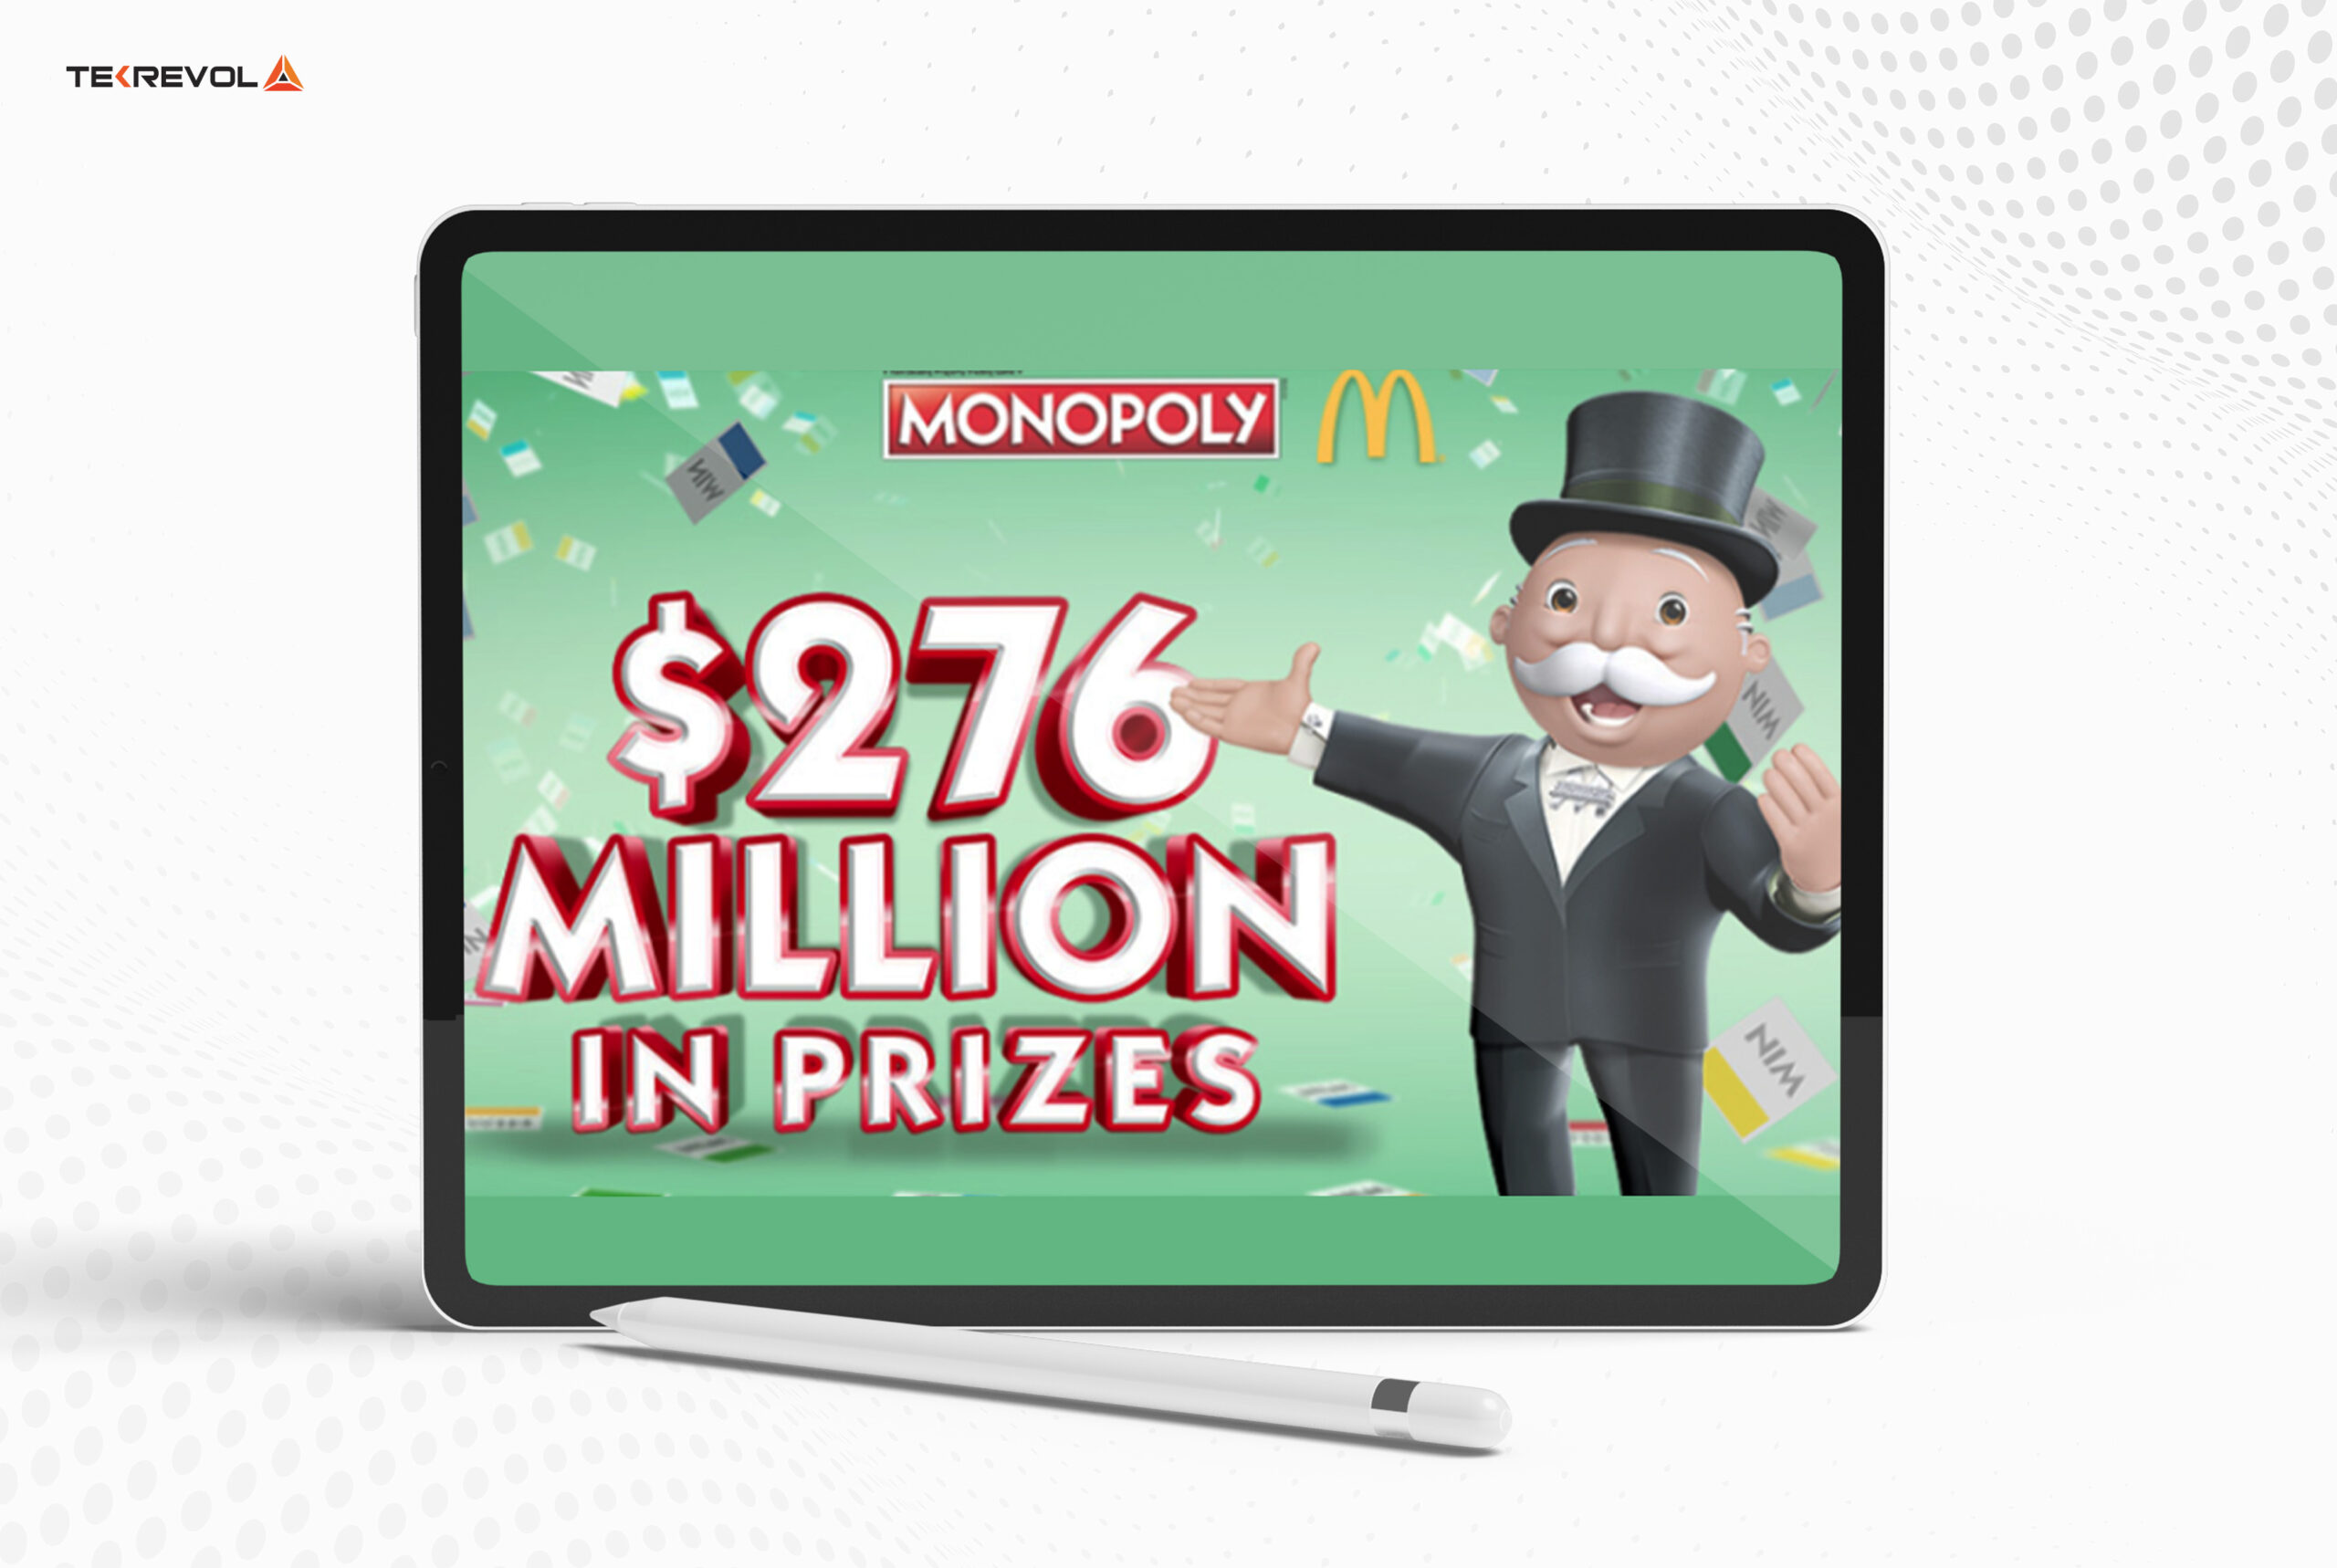 McDonalds-monopoly-classic-gamified-campaign